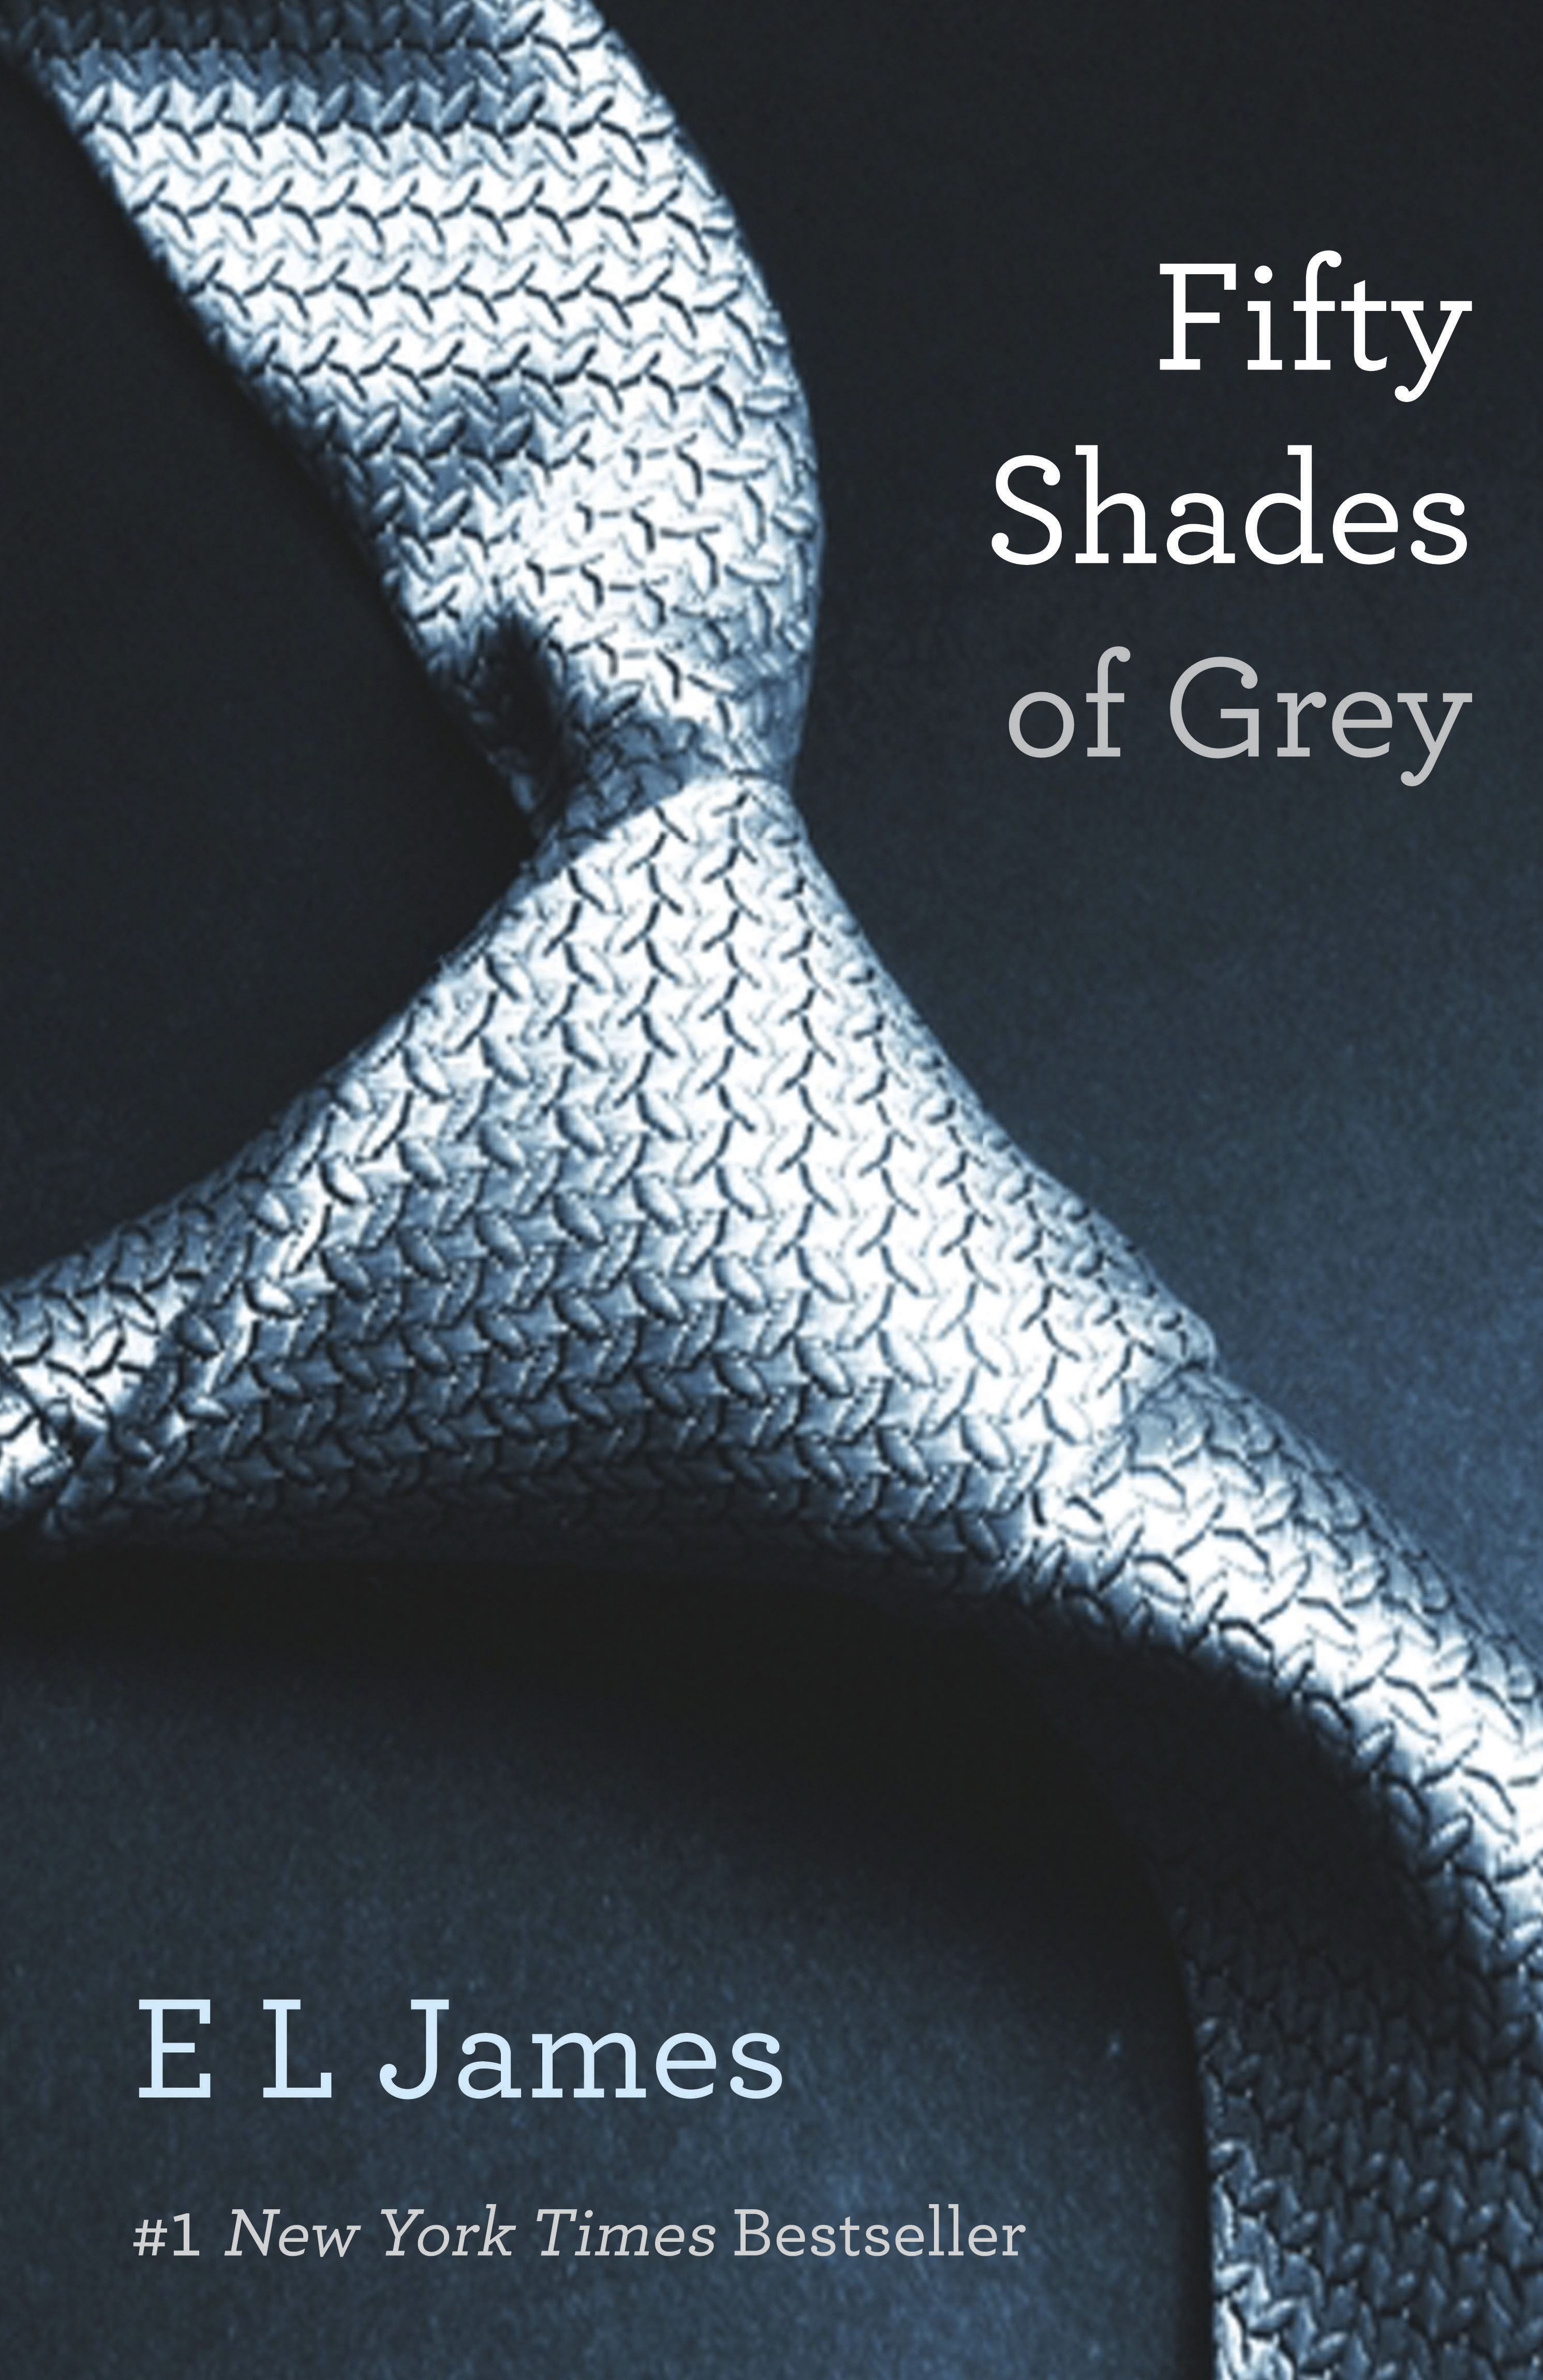 For parents, “Fifty Shades of Grey” film sparks sex talk